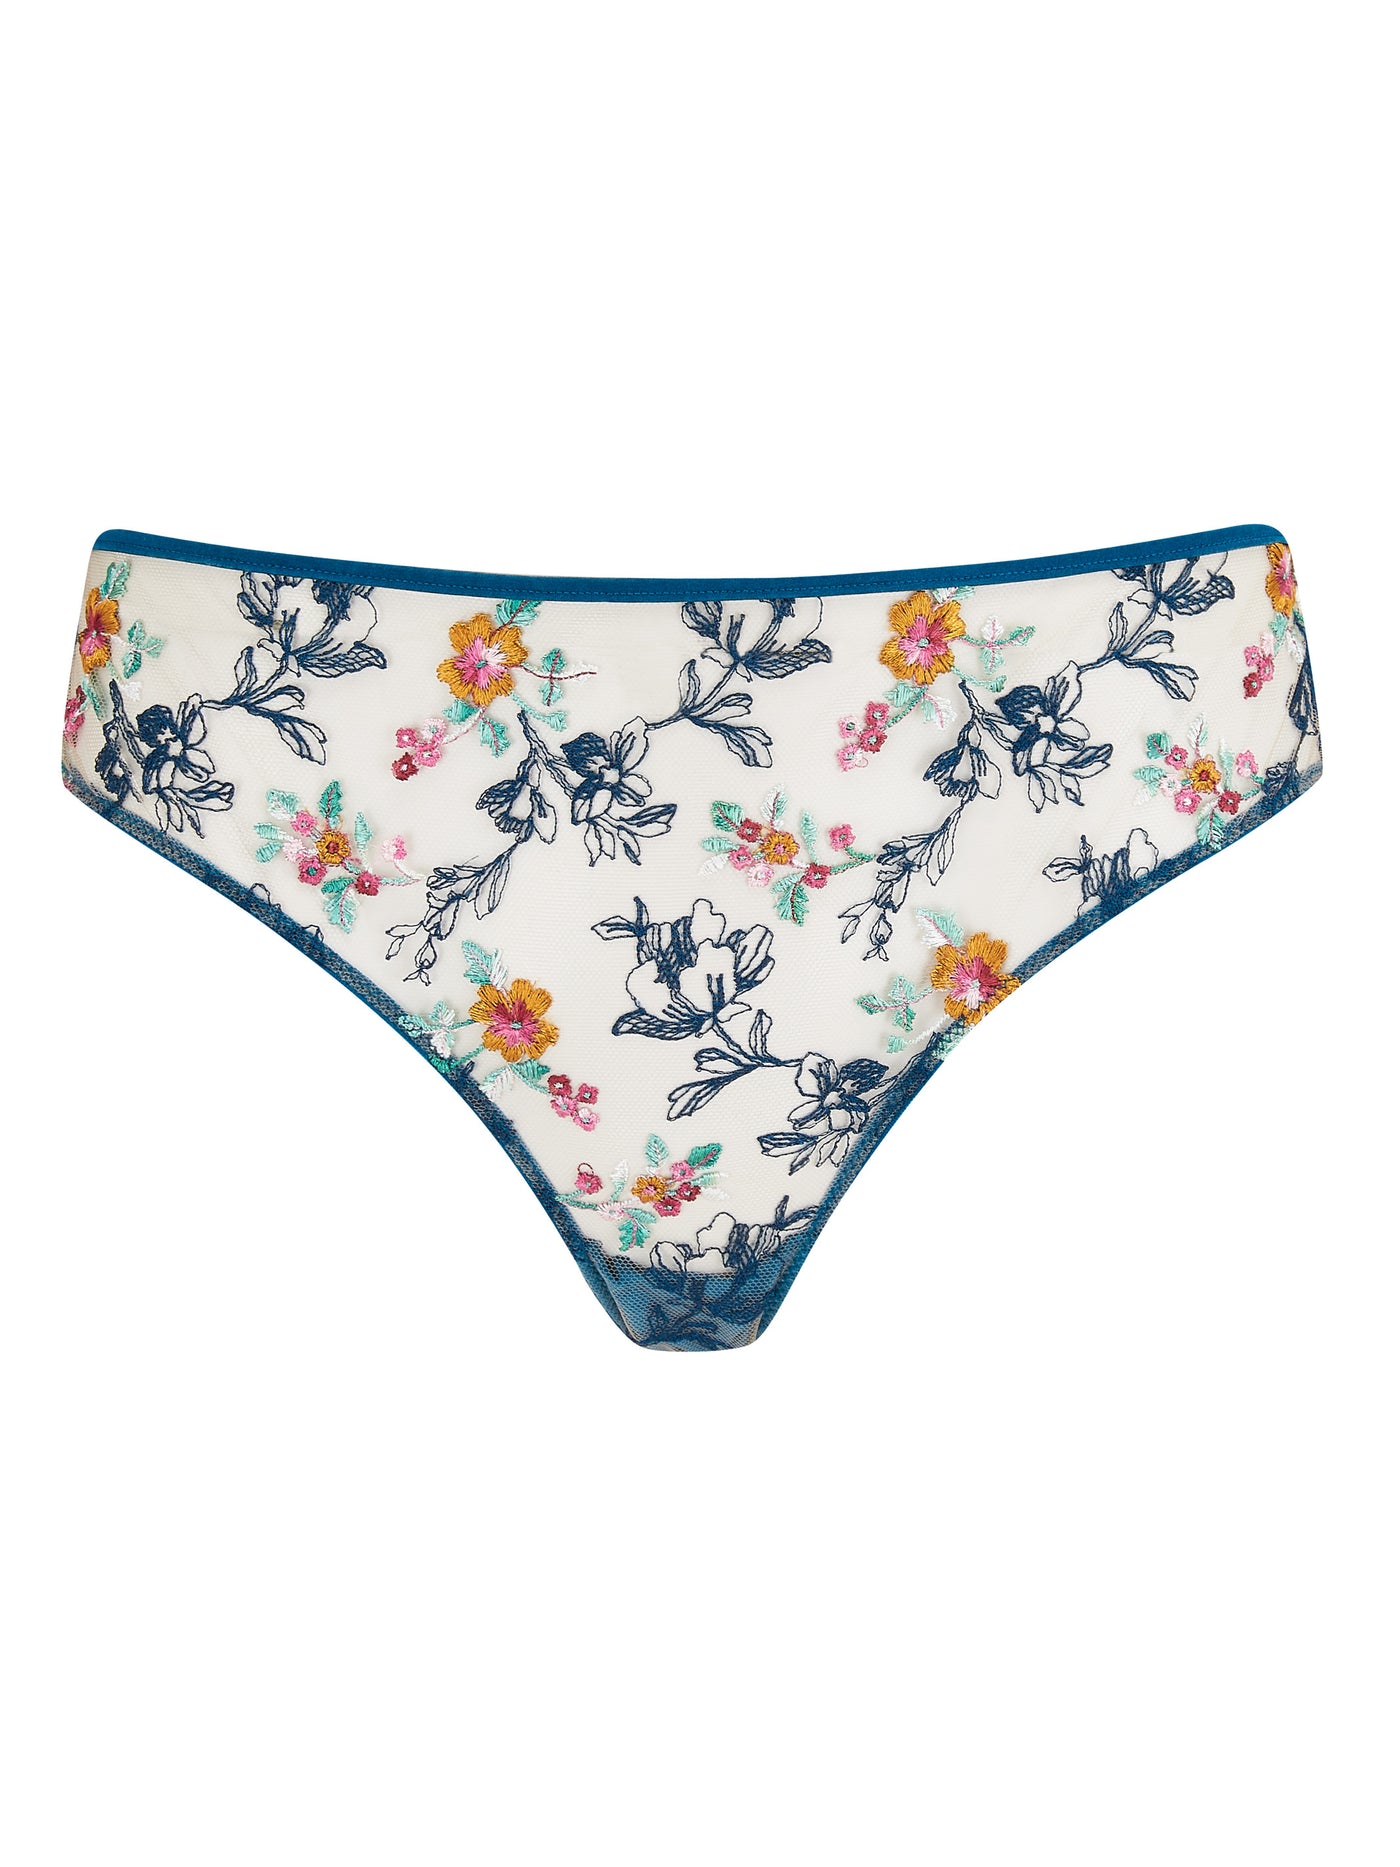 Evelyn Cyan Floral Embroidered High Waist Knickers - Katherine Hamilton